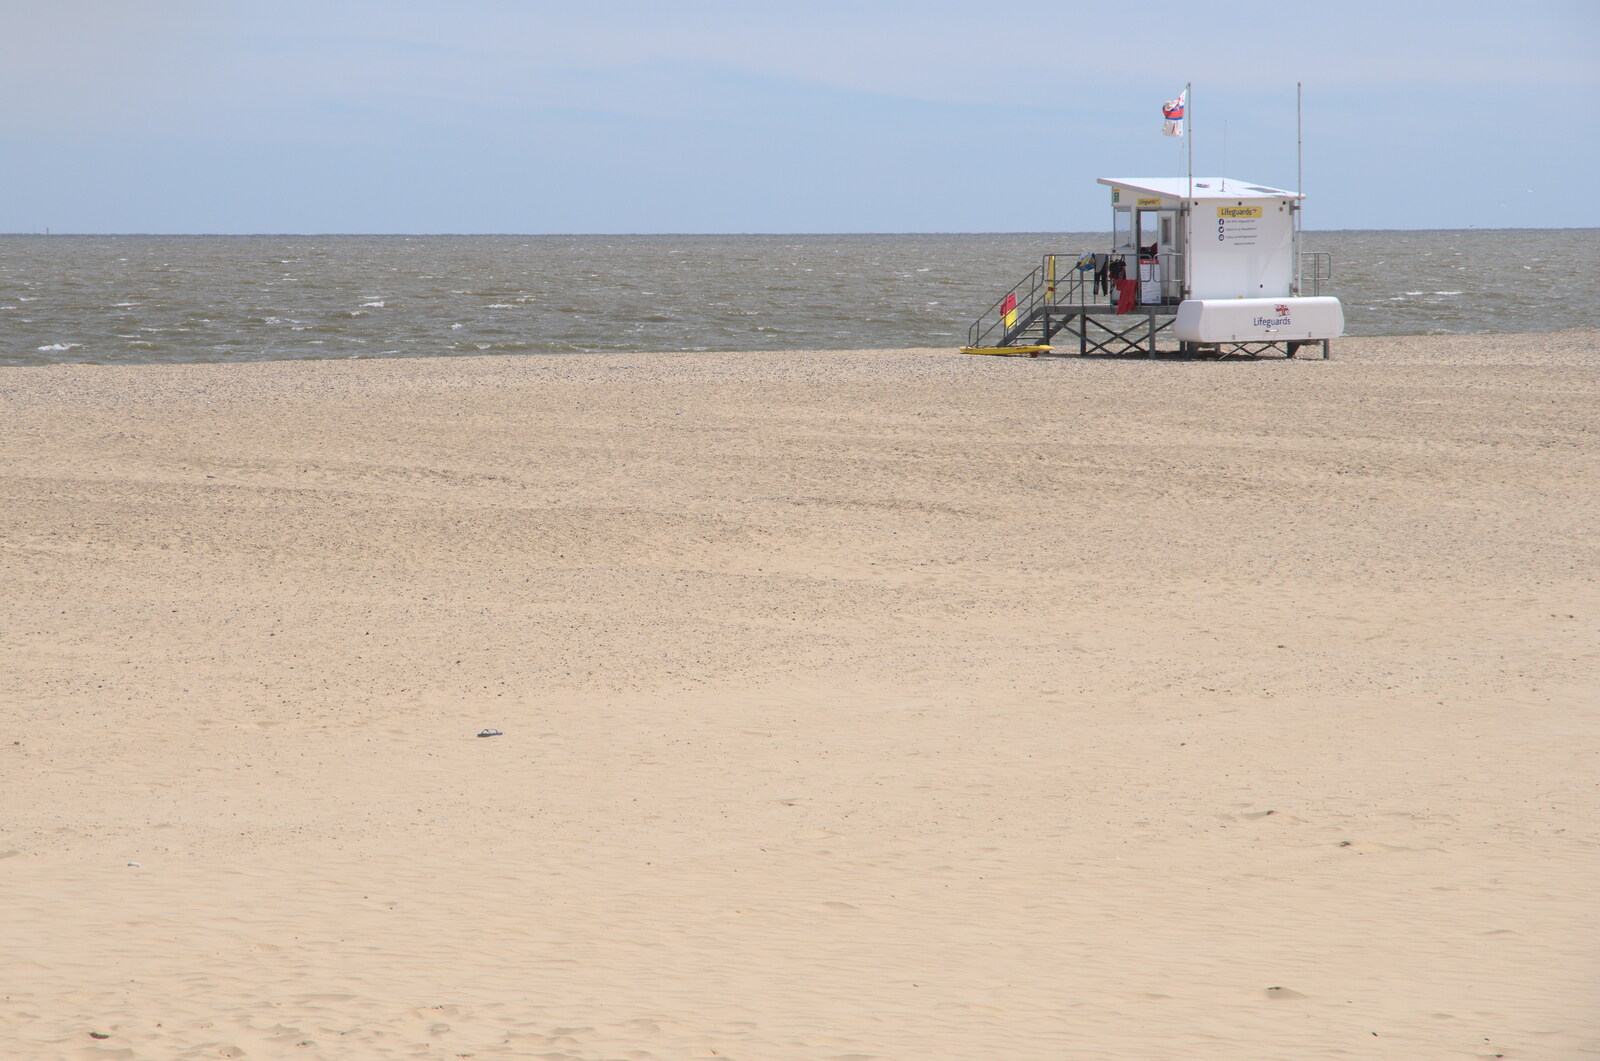 The wide beach is empty in places from Faded Seaside Glamour: A Weekend in Great Yarmouth, Norfolk - 29th May 2022